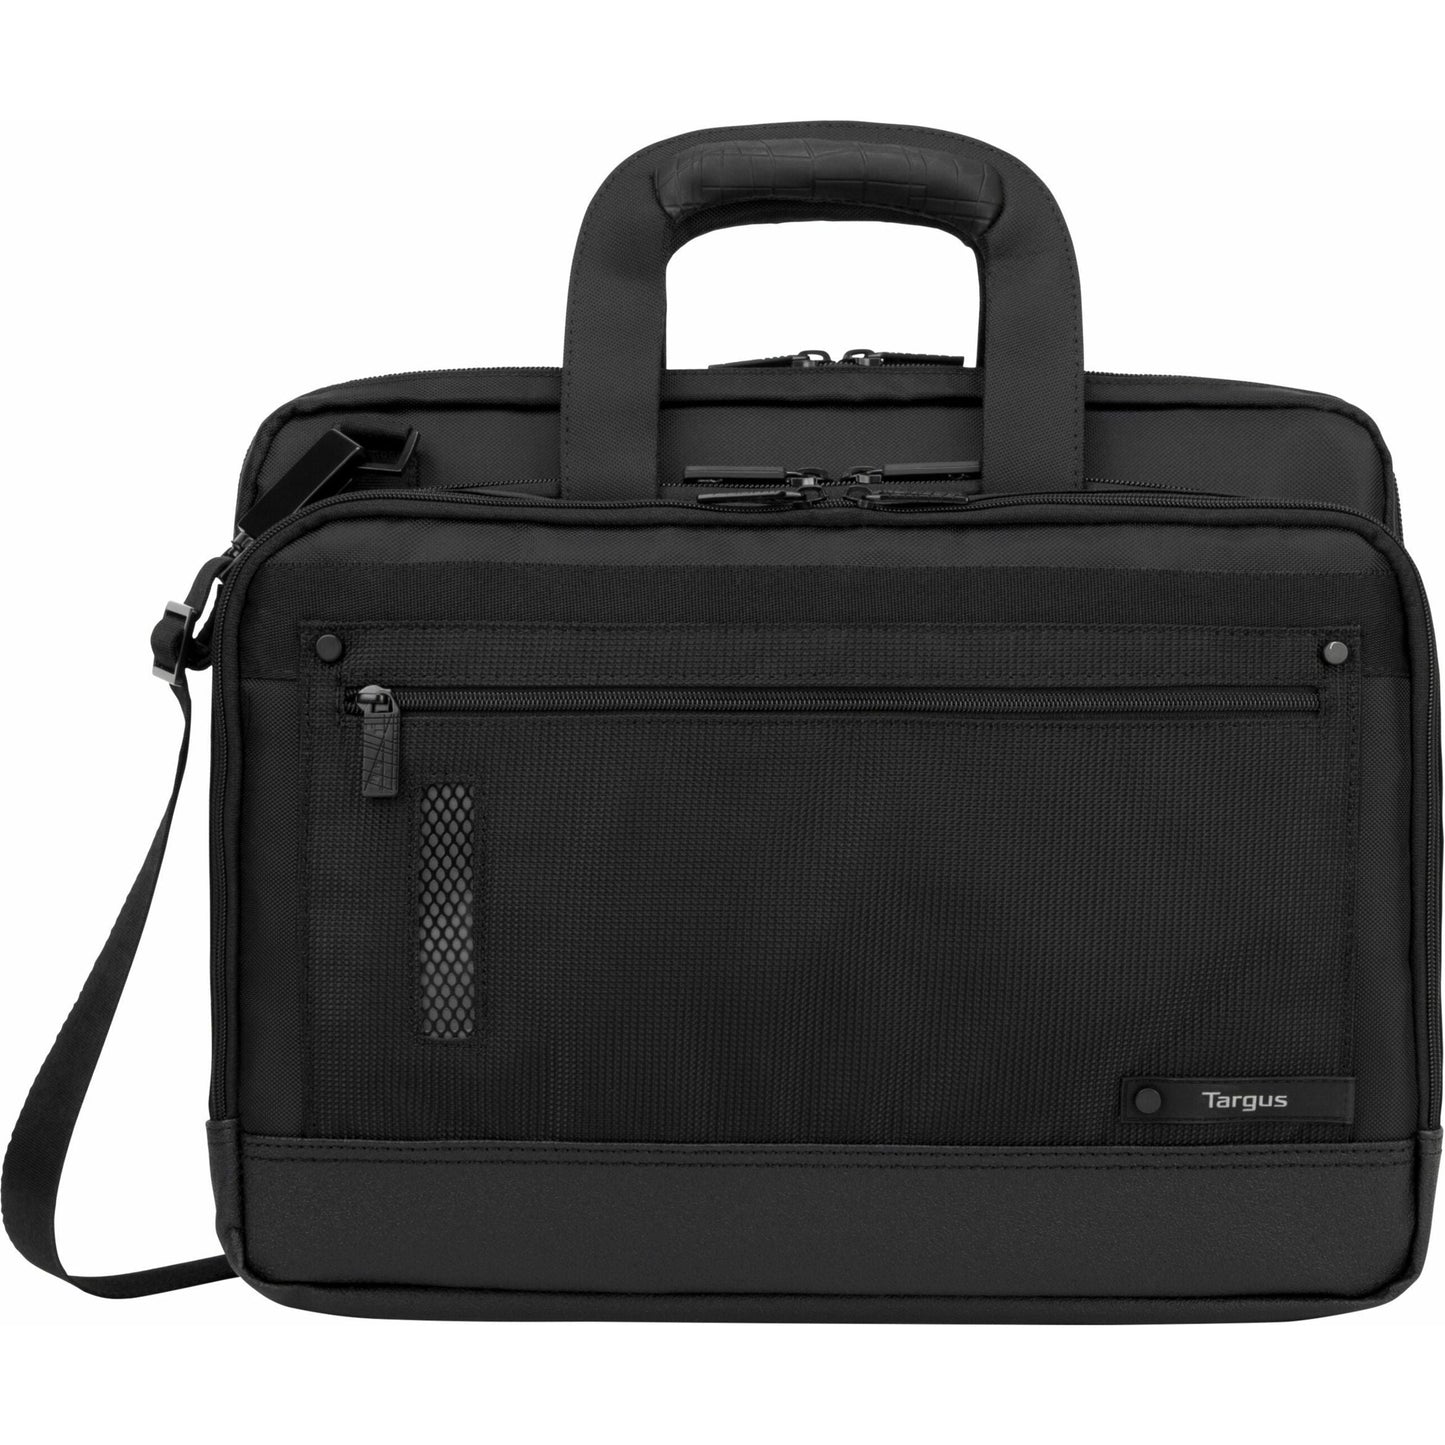 Targus Revolution TTL416US Carrying Case (Briefcase) for 15.6" to 16" Apple iPad Notebook - Black